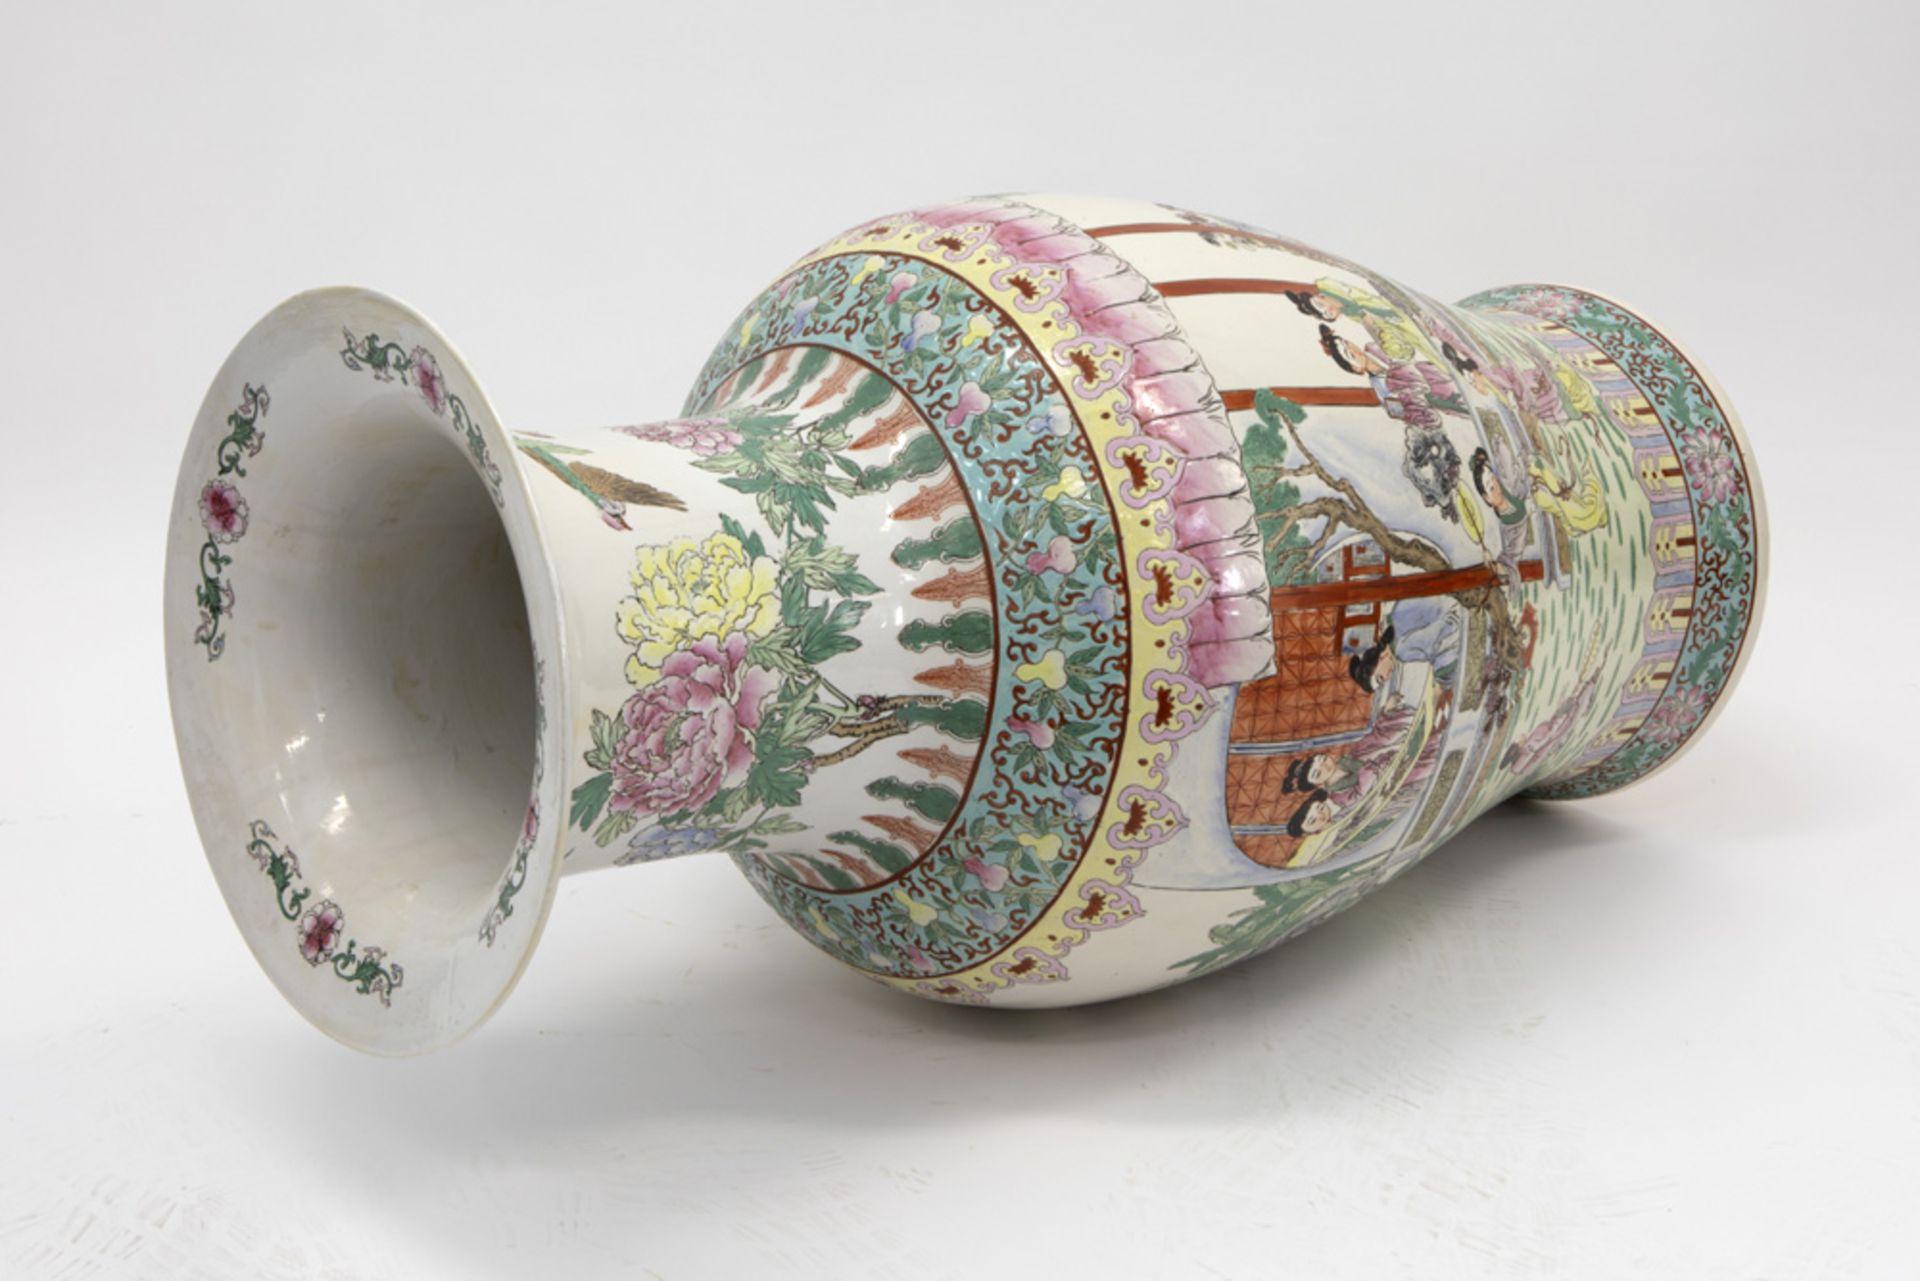 20th Cent. Chinese vase in porcelain with a polychrome decor ||20ste eeuwse Chinese vaas in - Image 4 of 6